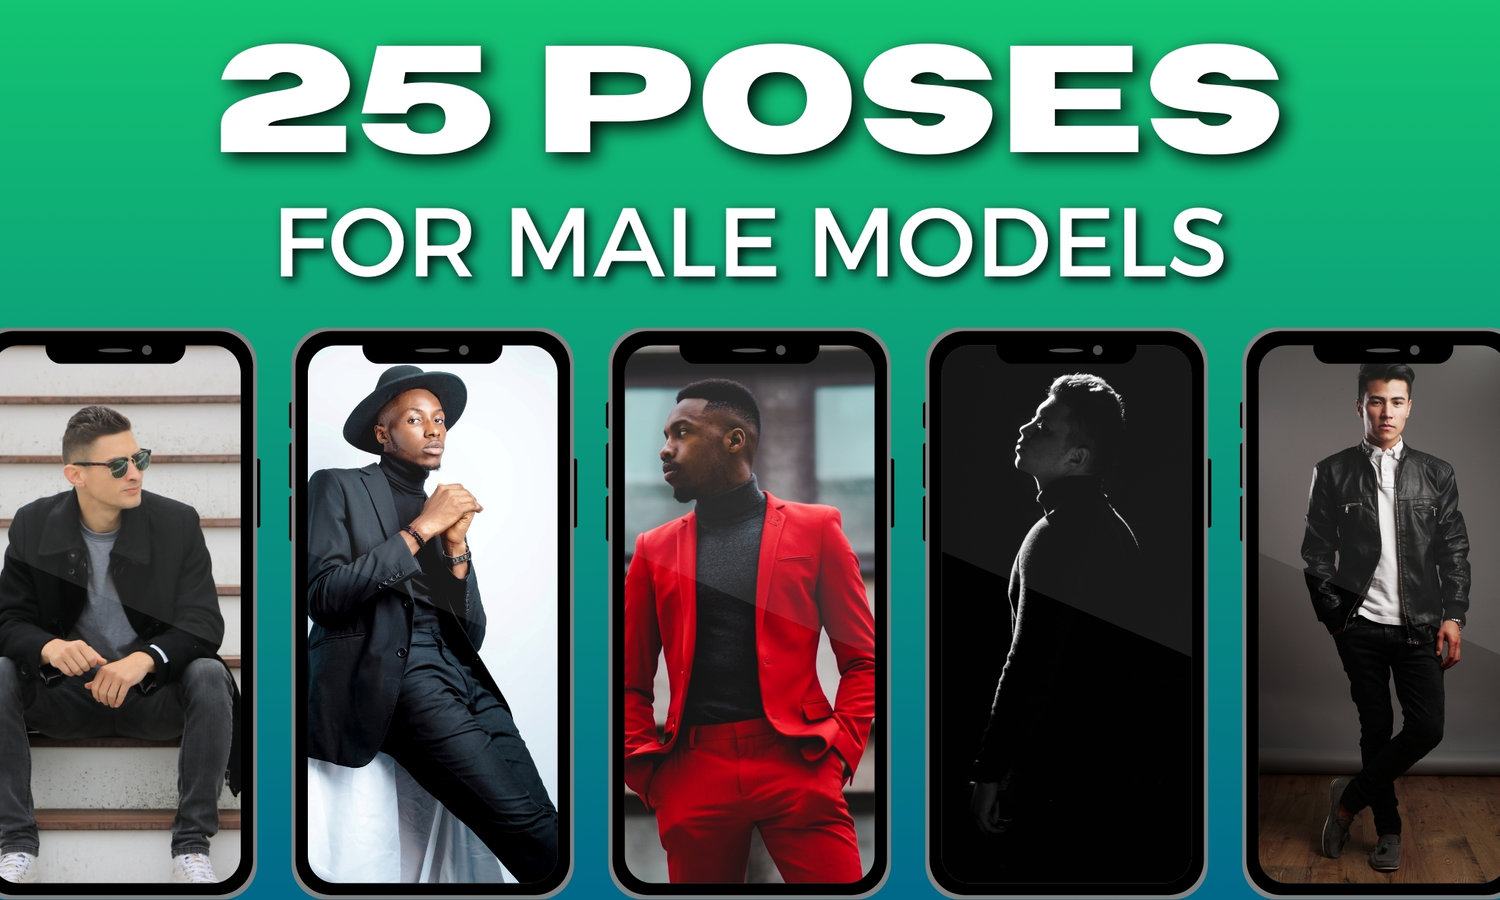 22 of the Most Gorgeous Female Poses You Should Try | Contrastly